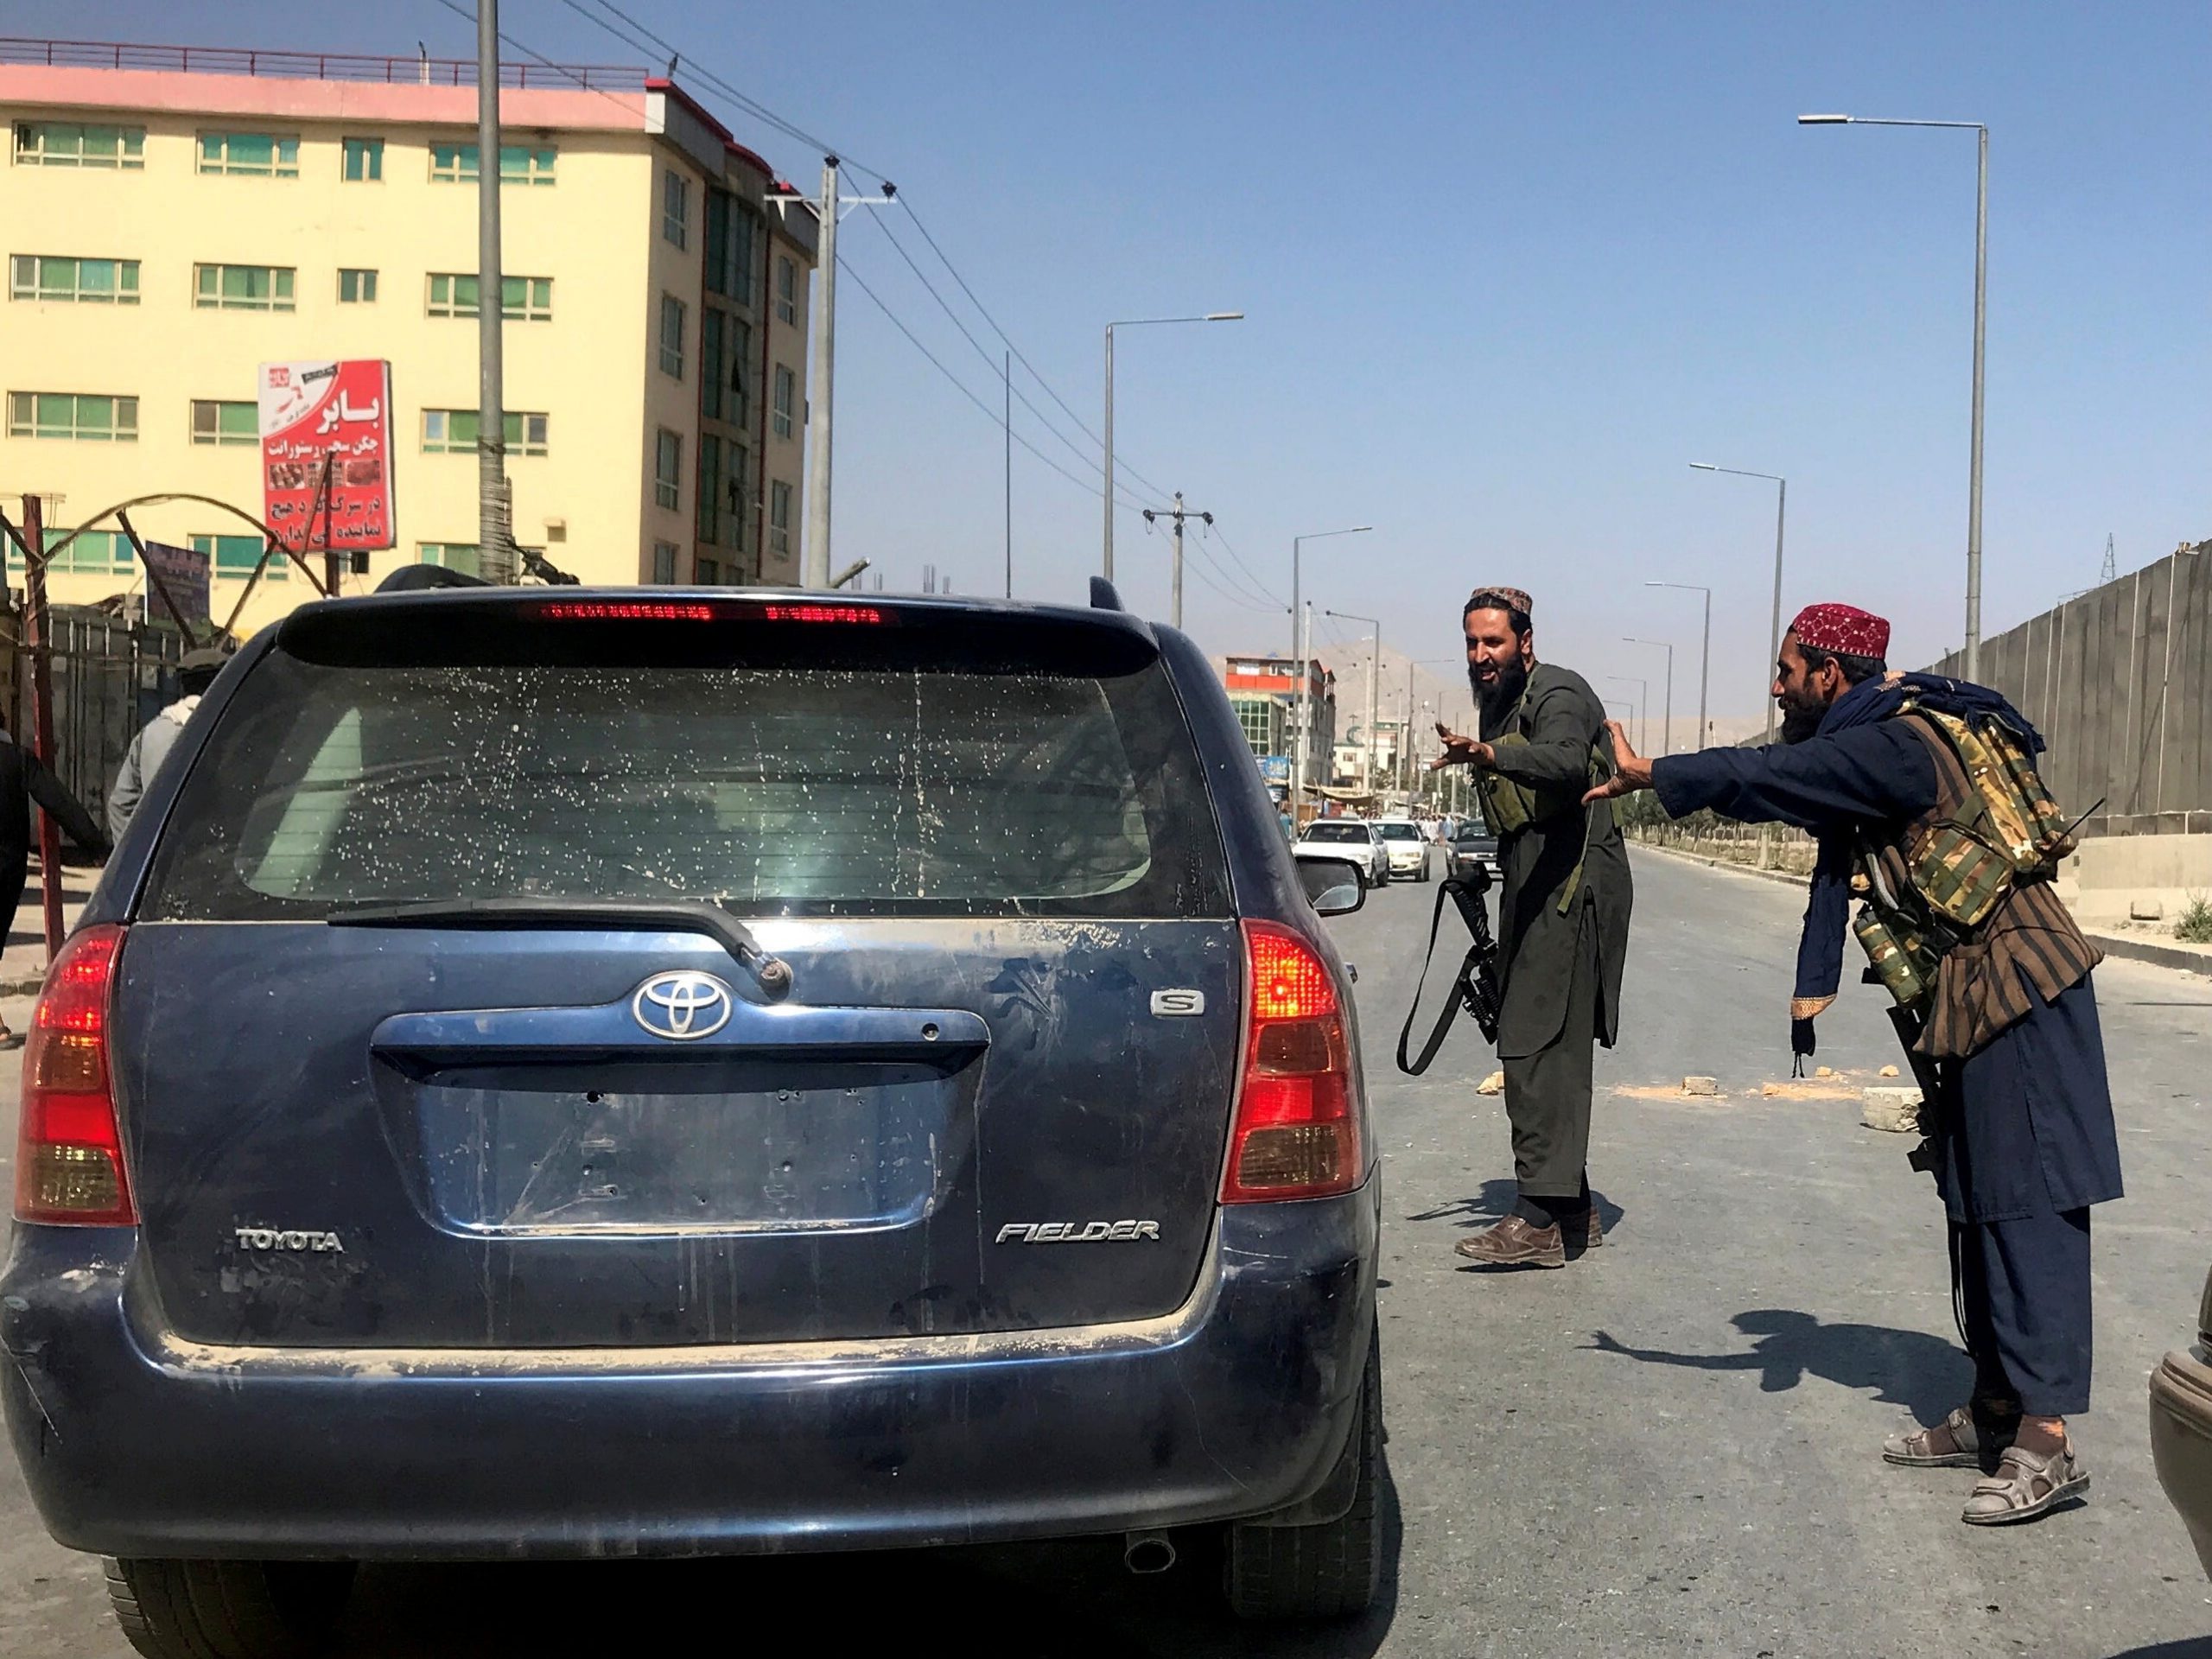 FILE PHOTO: Members of Taliban forces gesture as they check a vehicle on a street in Kabul, Afghanistan, August 16, 2021.